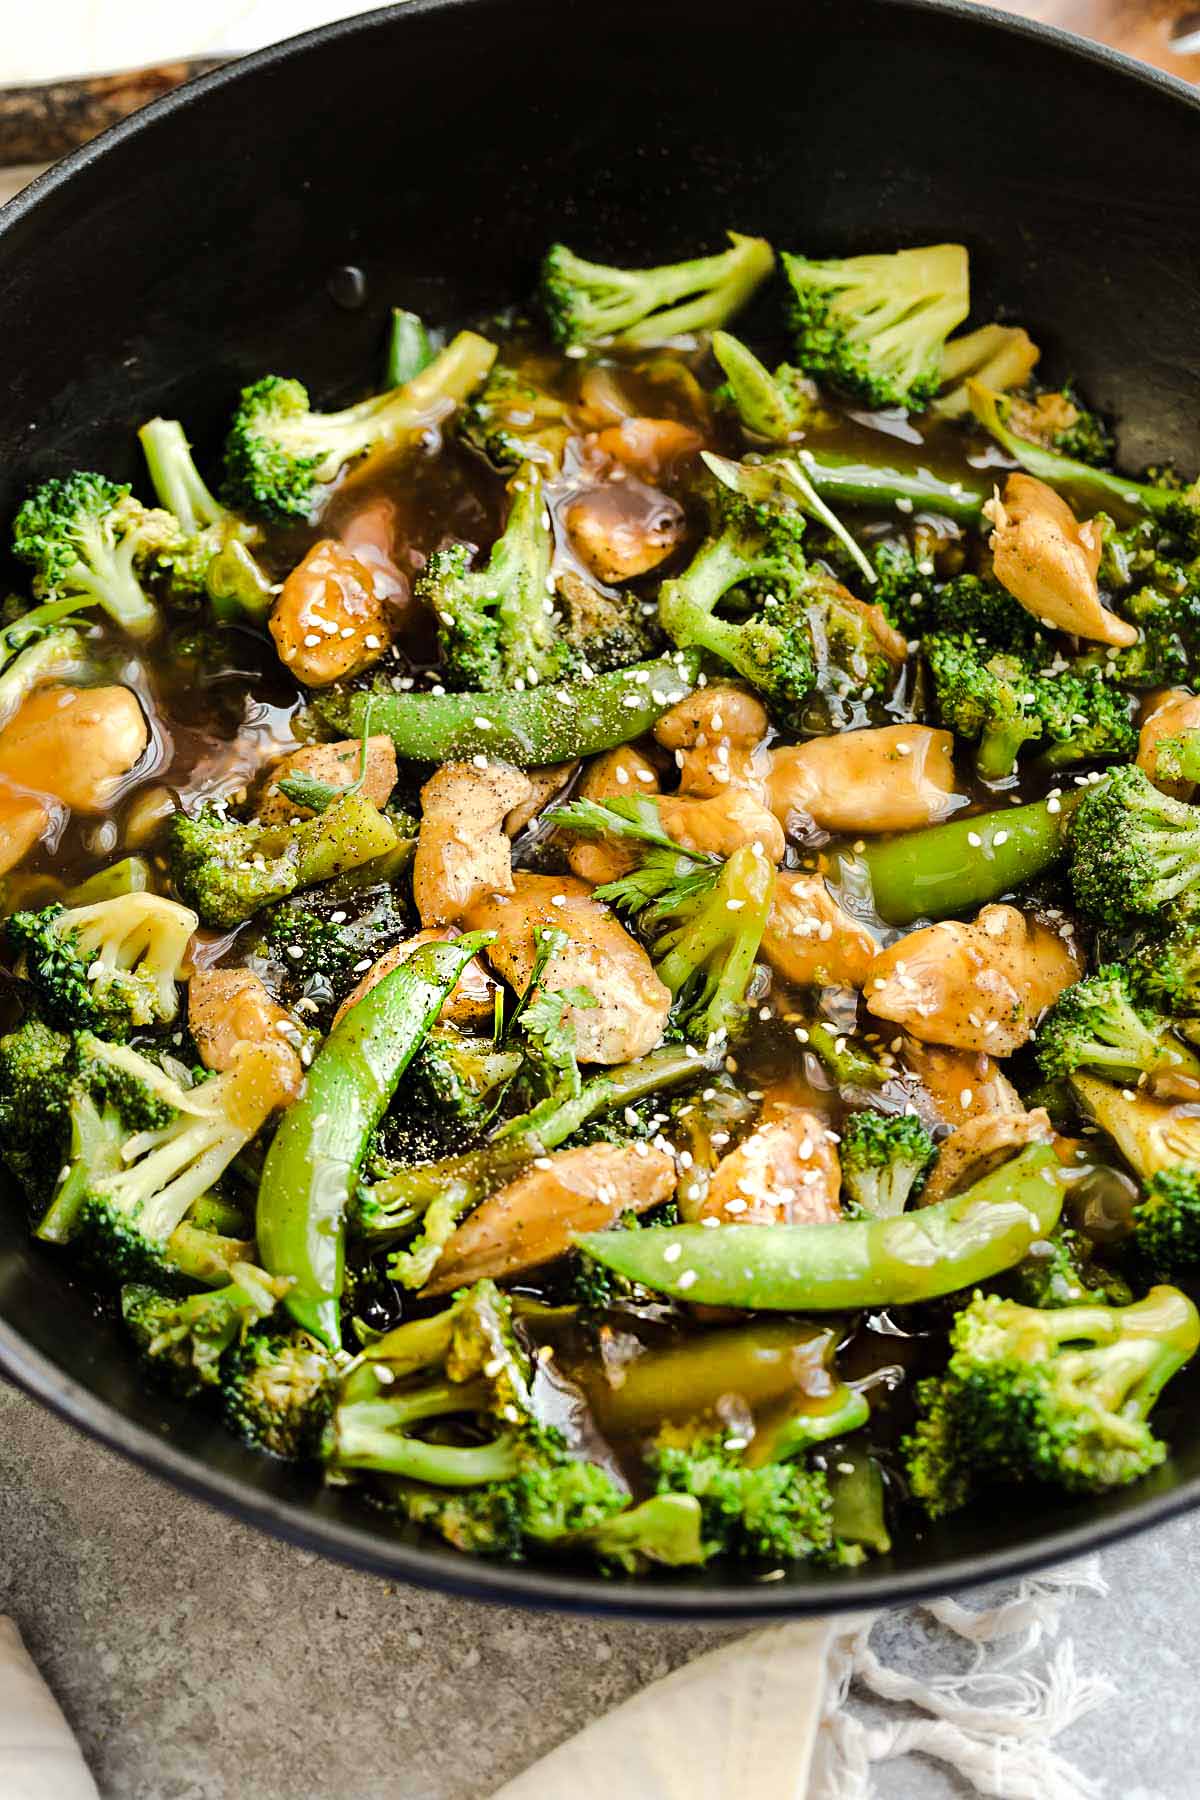 Chicken Stir Fry with Broccoli Snap Peas (Vegetable) Picture Recipe ...